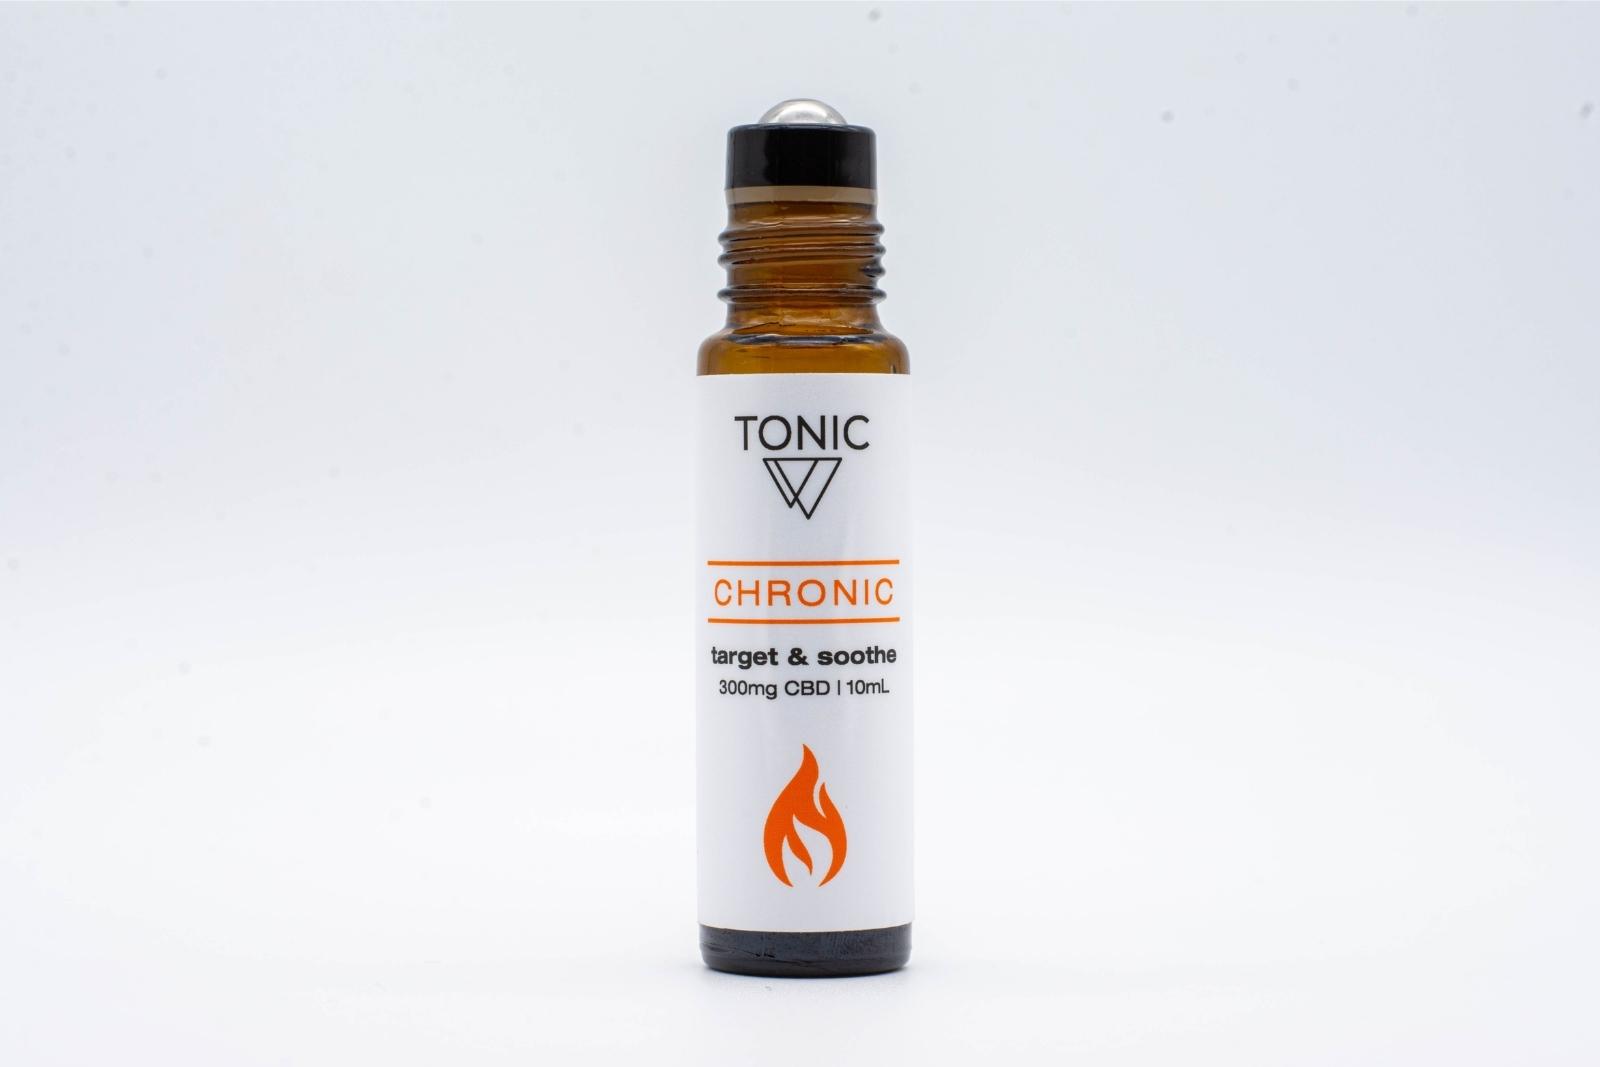 A bottle of Tonic's Chronic CBD + Essential oil roll-on with its top removed to show the roller-ball applicator, on a white background